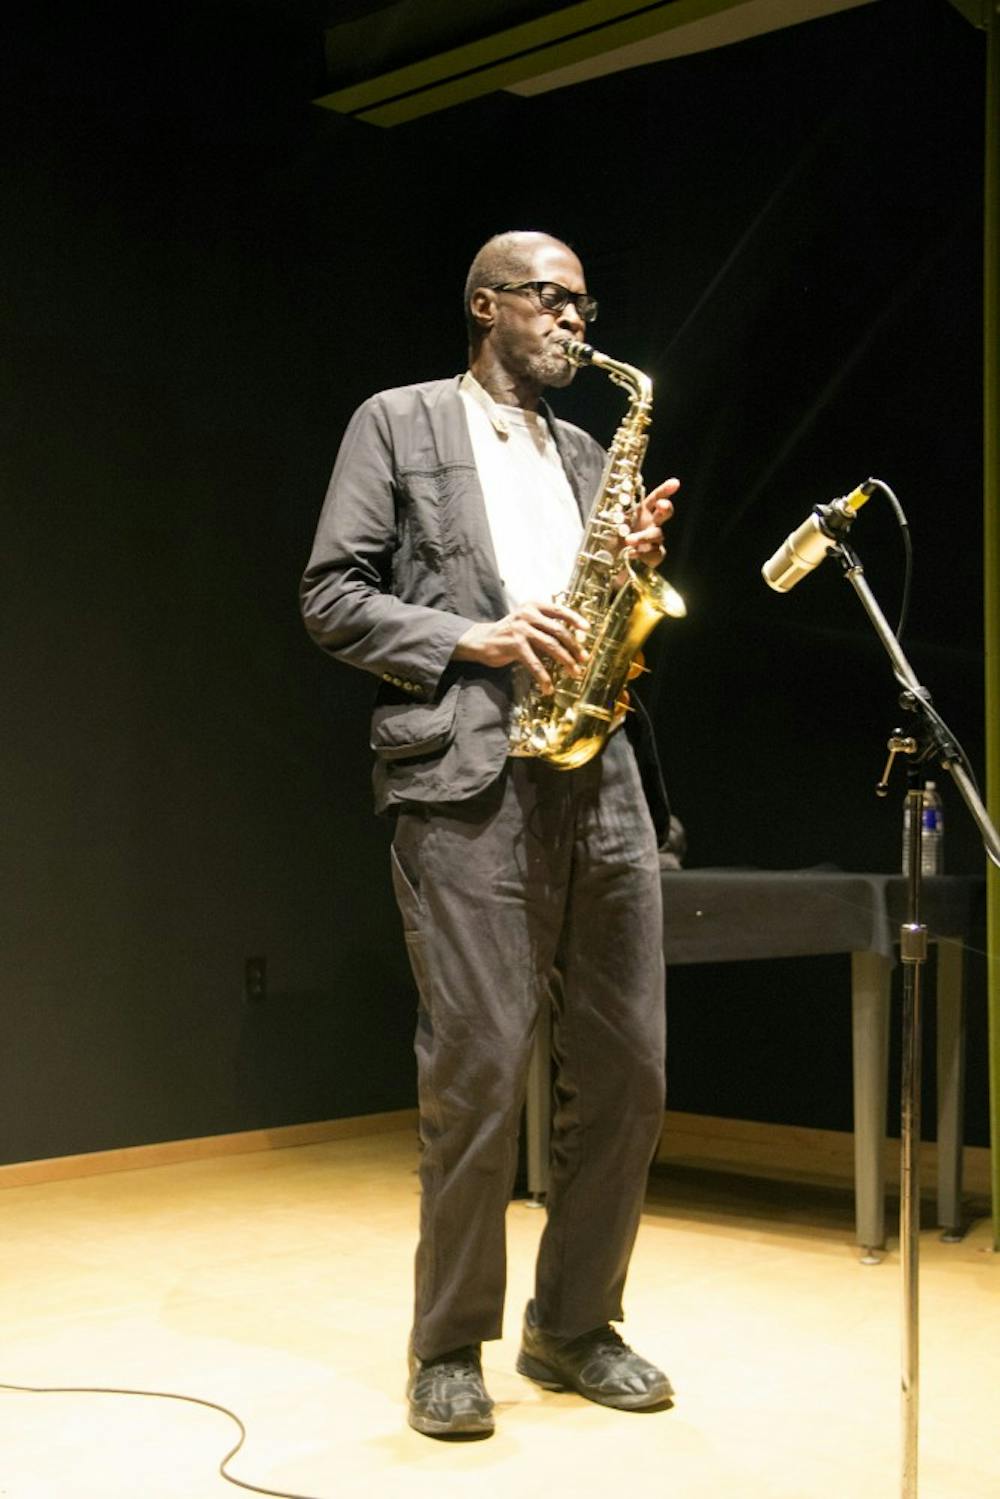 <p>Charles Gayle, a free jazz multi-instrumentalist, performed at Hallwalls Contemporary Arts Center on Friday night. The artist, whose career spans as far back as the ‘60s, intimately played with expression in mind on the piano and saxophone.</p>